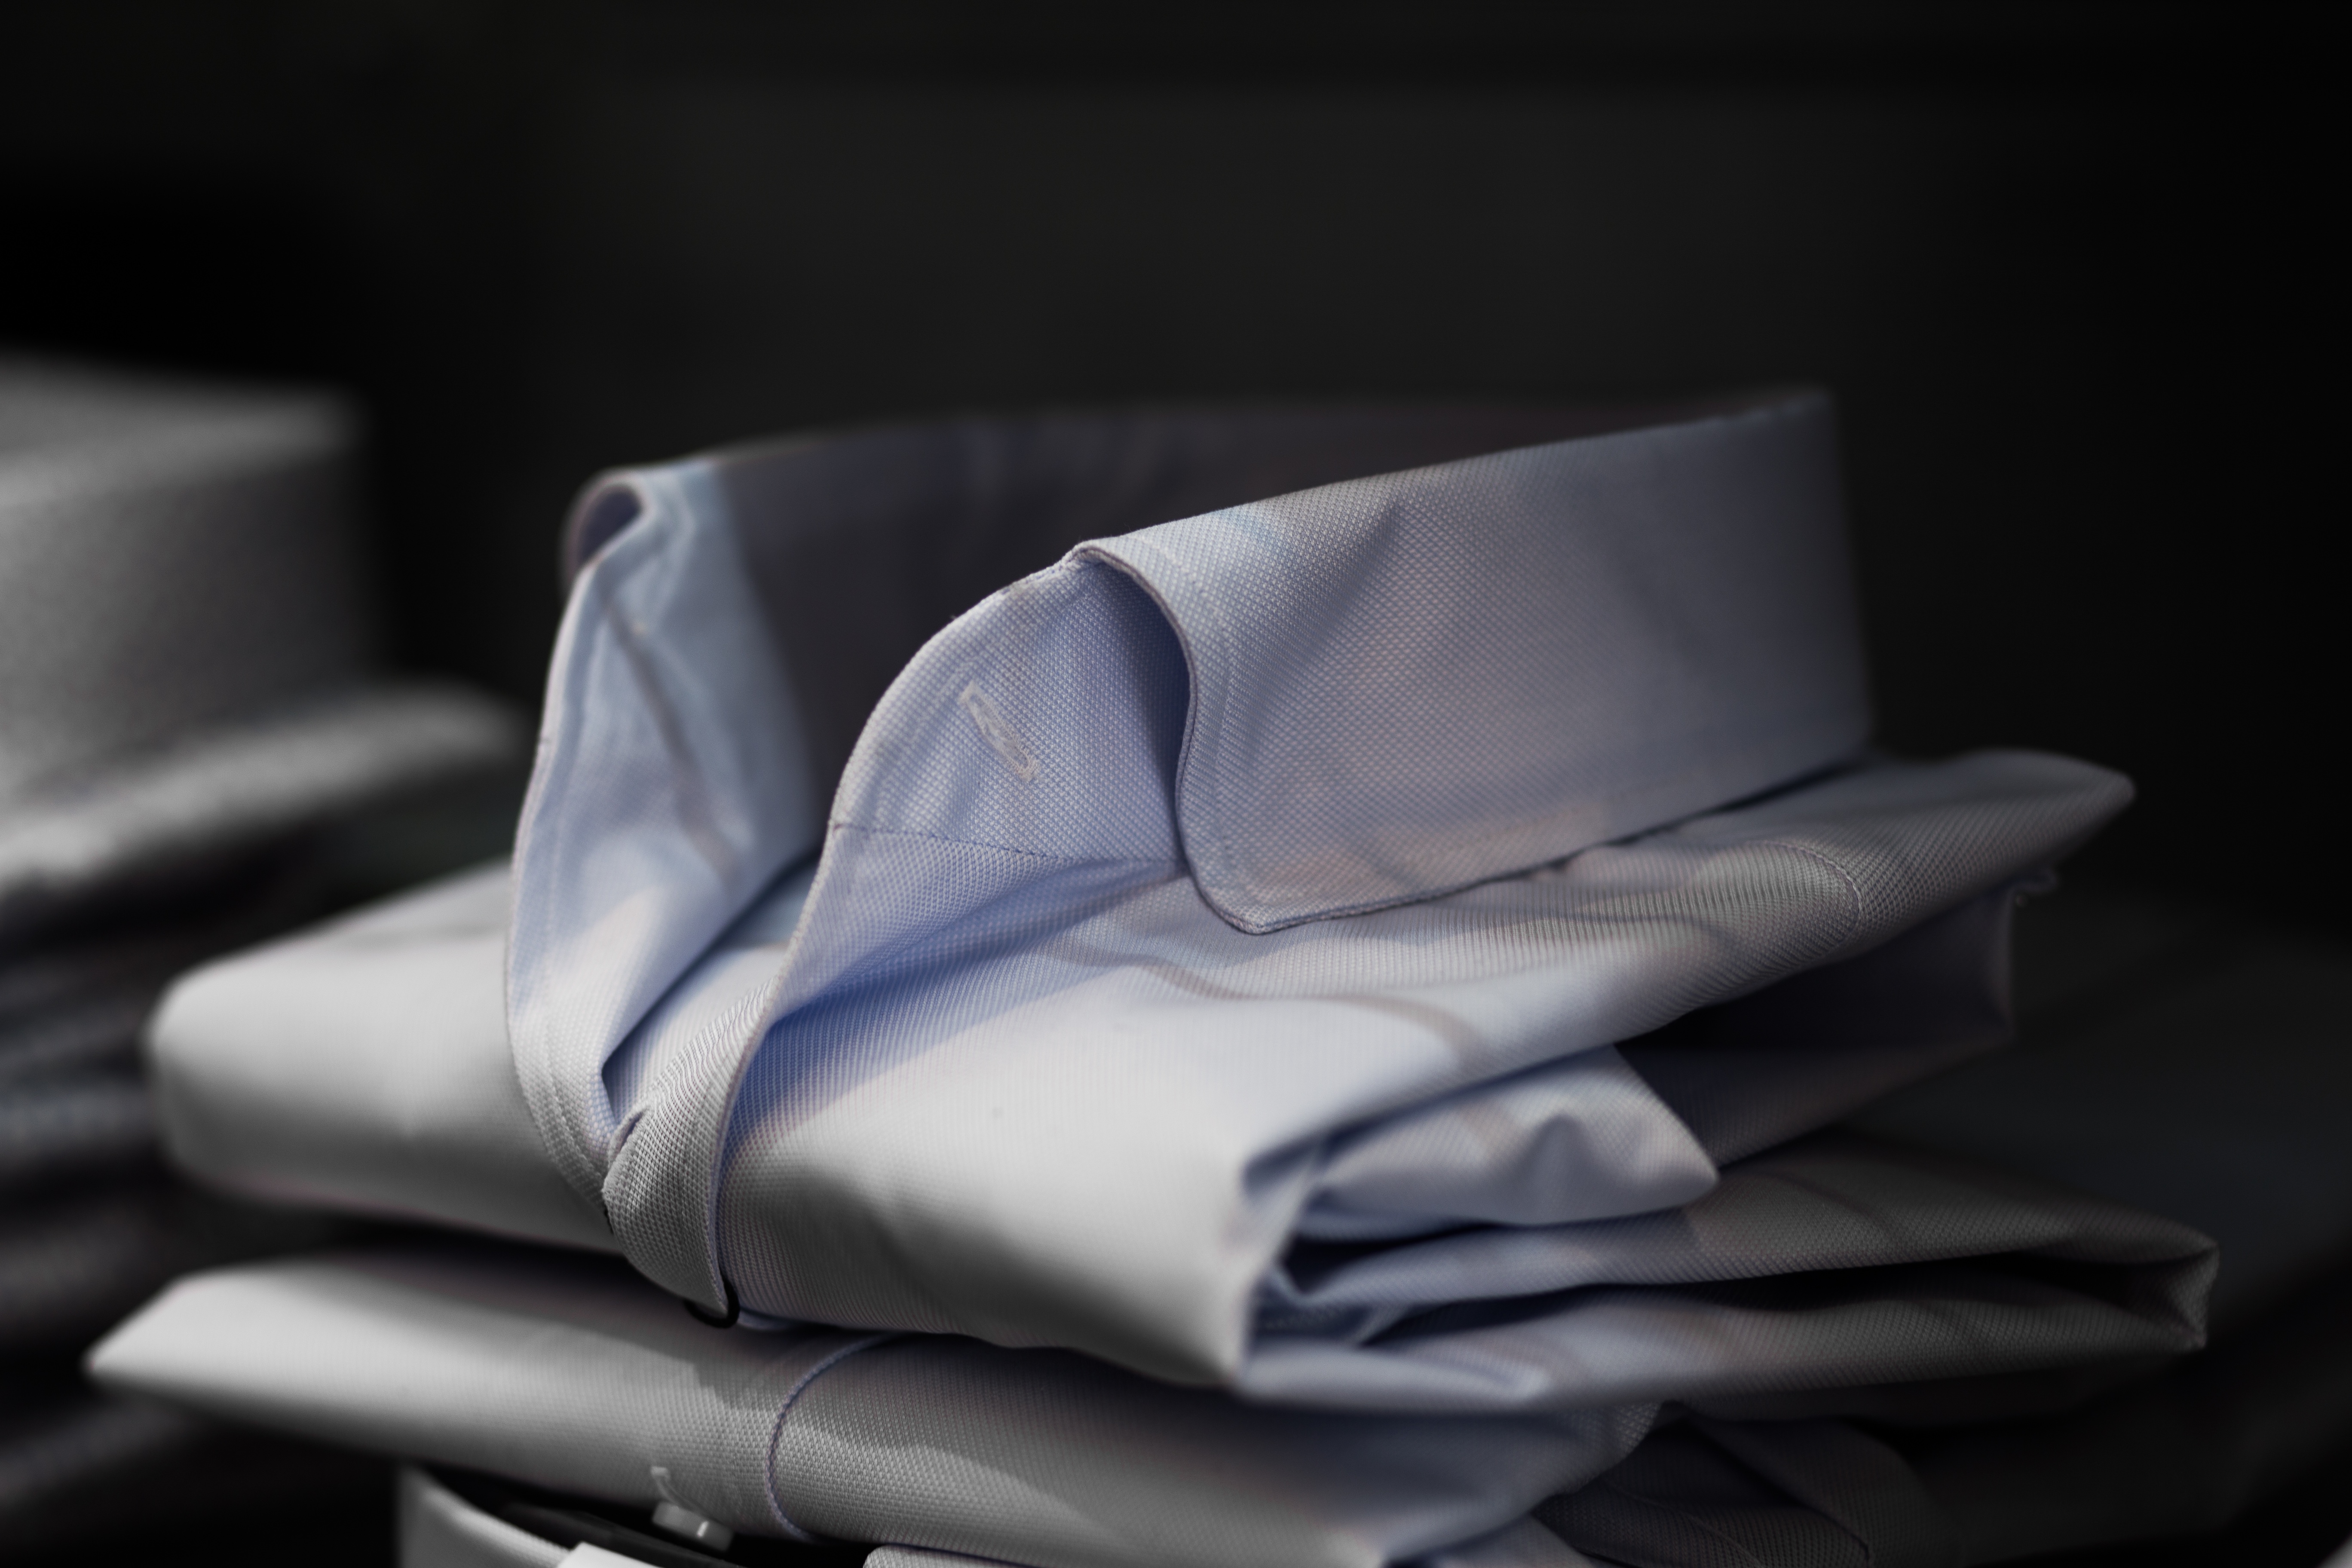 Mens shirts from Canali, Brioni, Eton and Stenströms